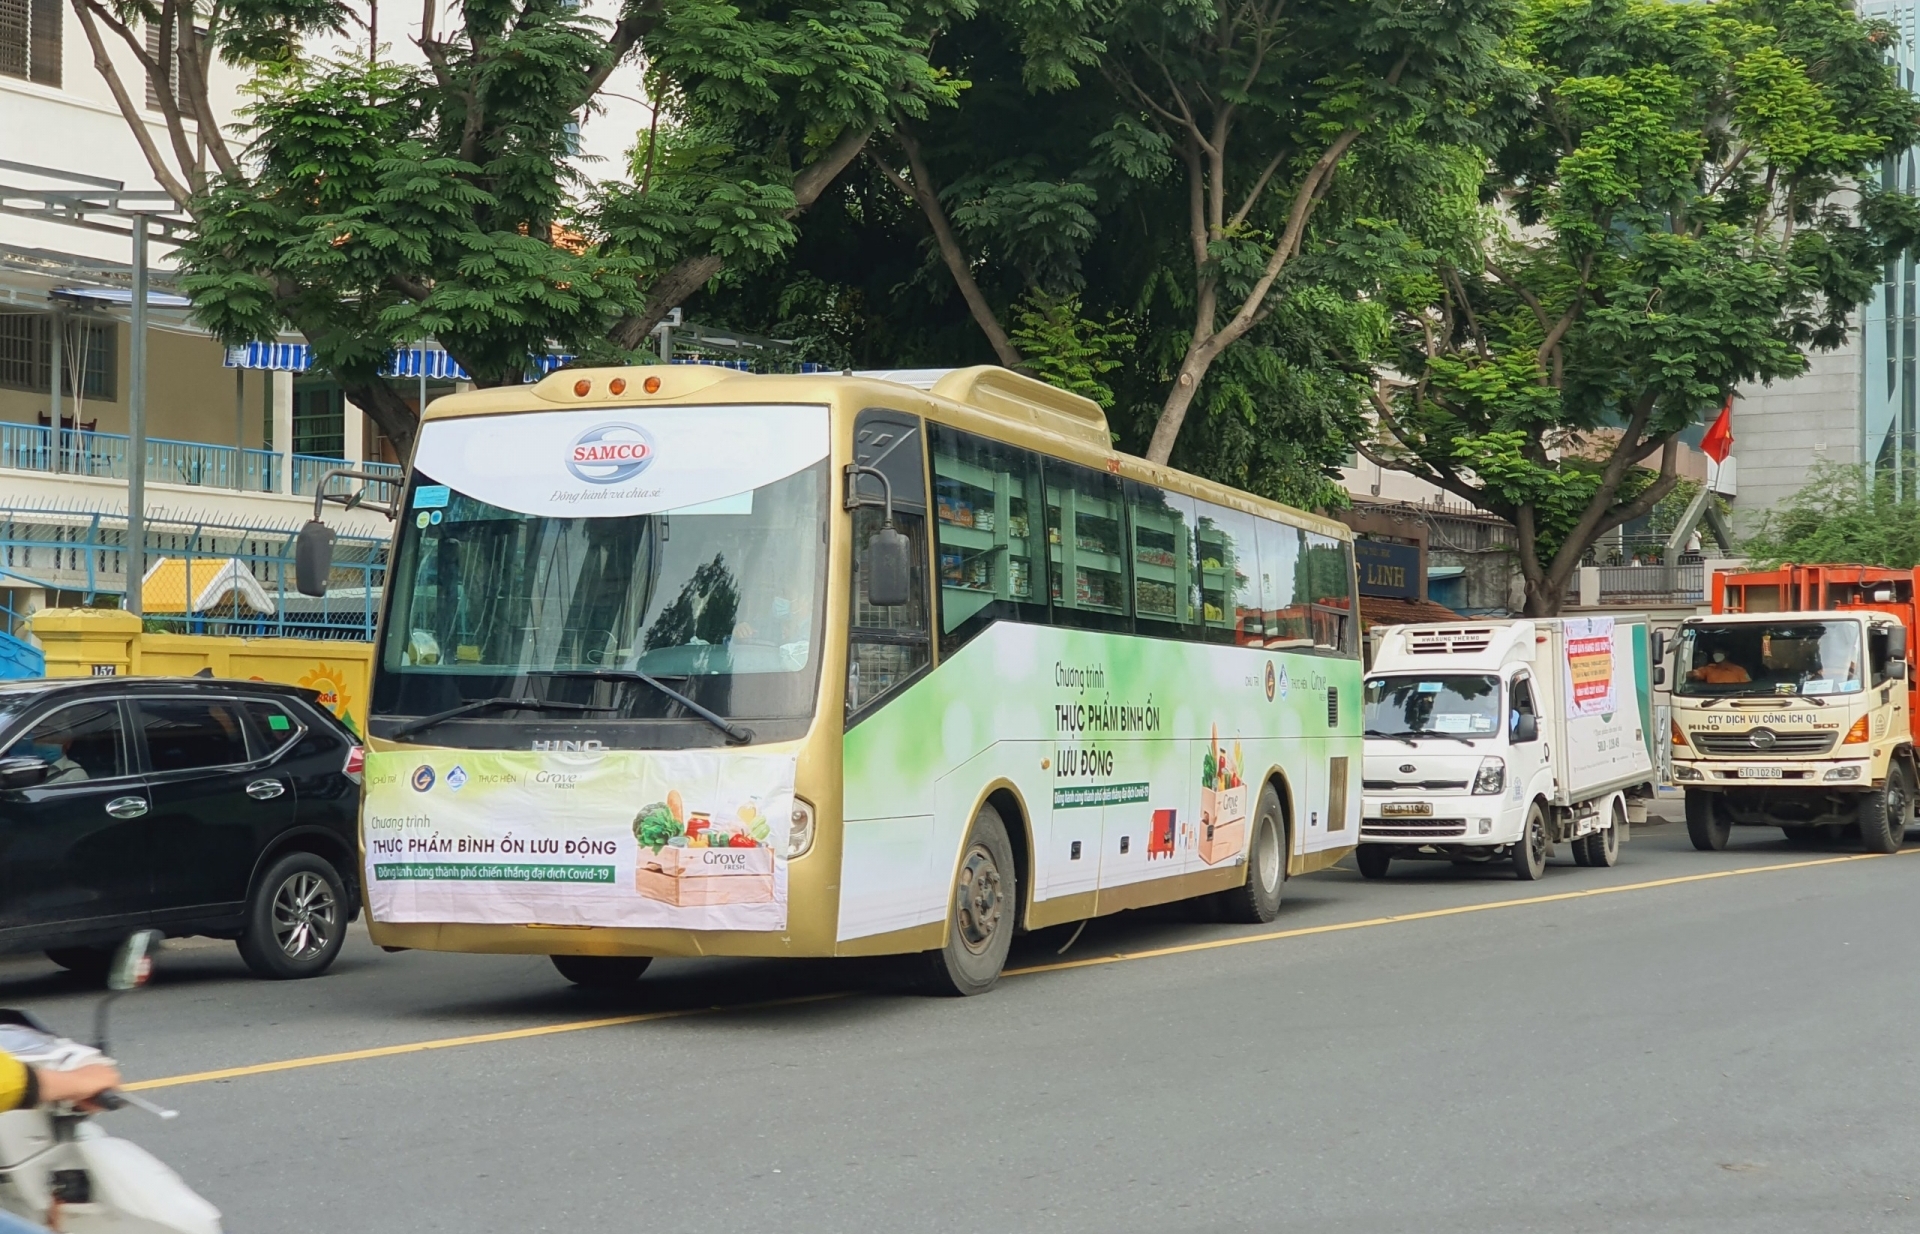 bus converted to mini supermarkets to sell food in ho chi minh city